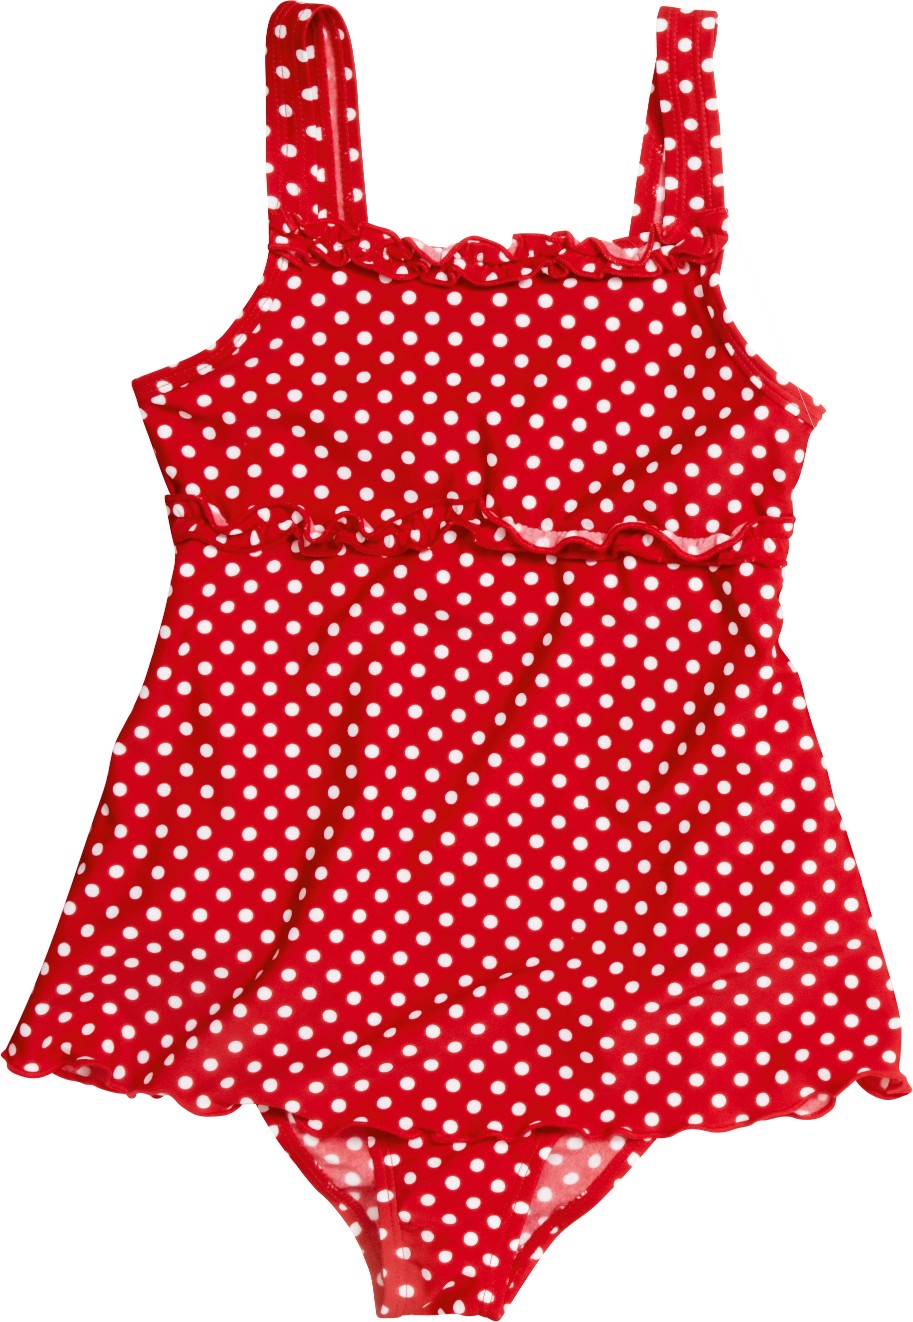 Playshoes - UV bathing suit for girls - Skirt - Dots - Red